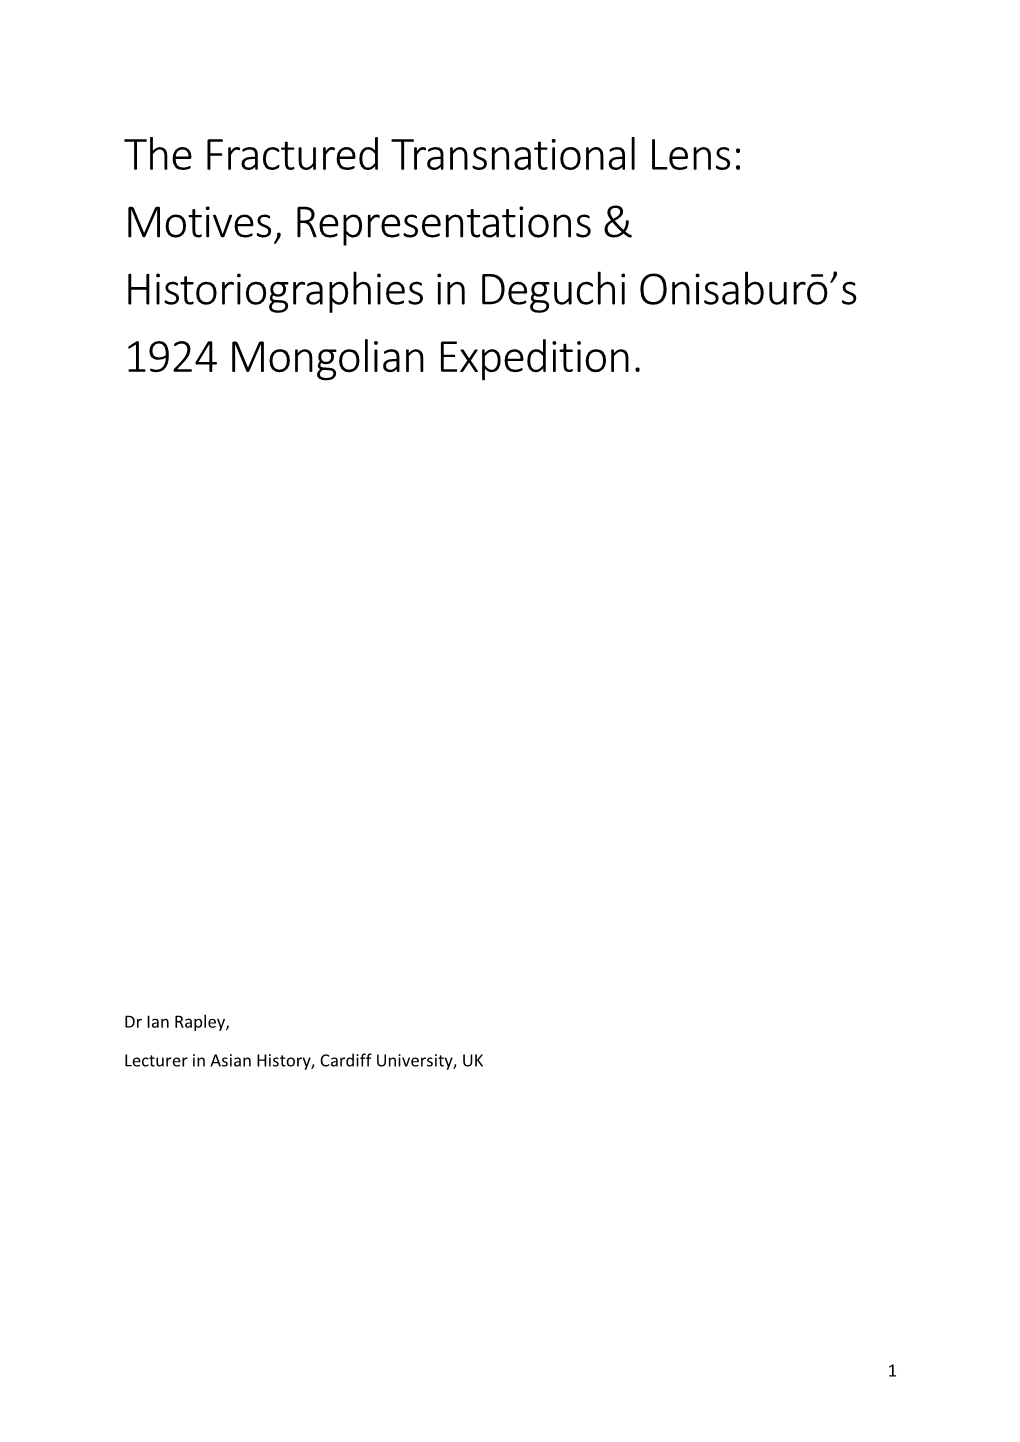 The Fractured Transnational Lens: Motives, Representations & Historiographies in Deguchi Onisaburō’S 1924 Mongolian Expedition